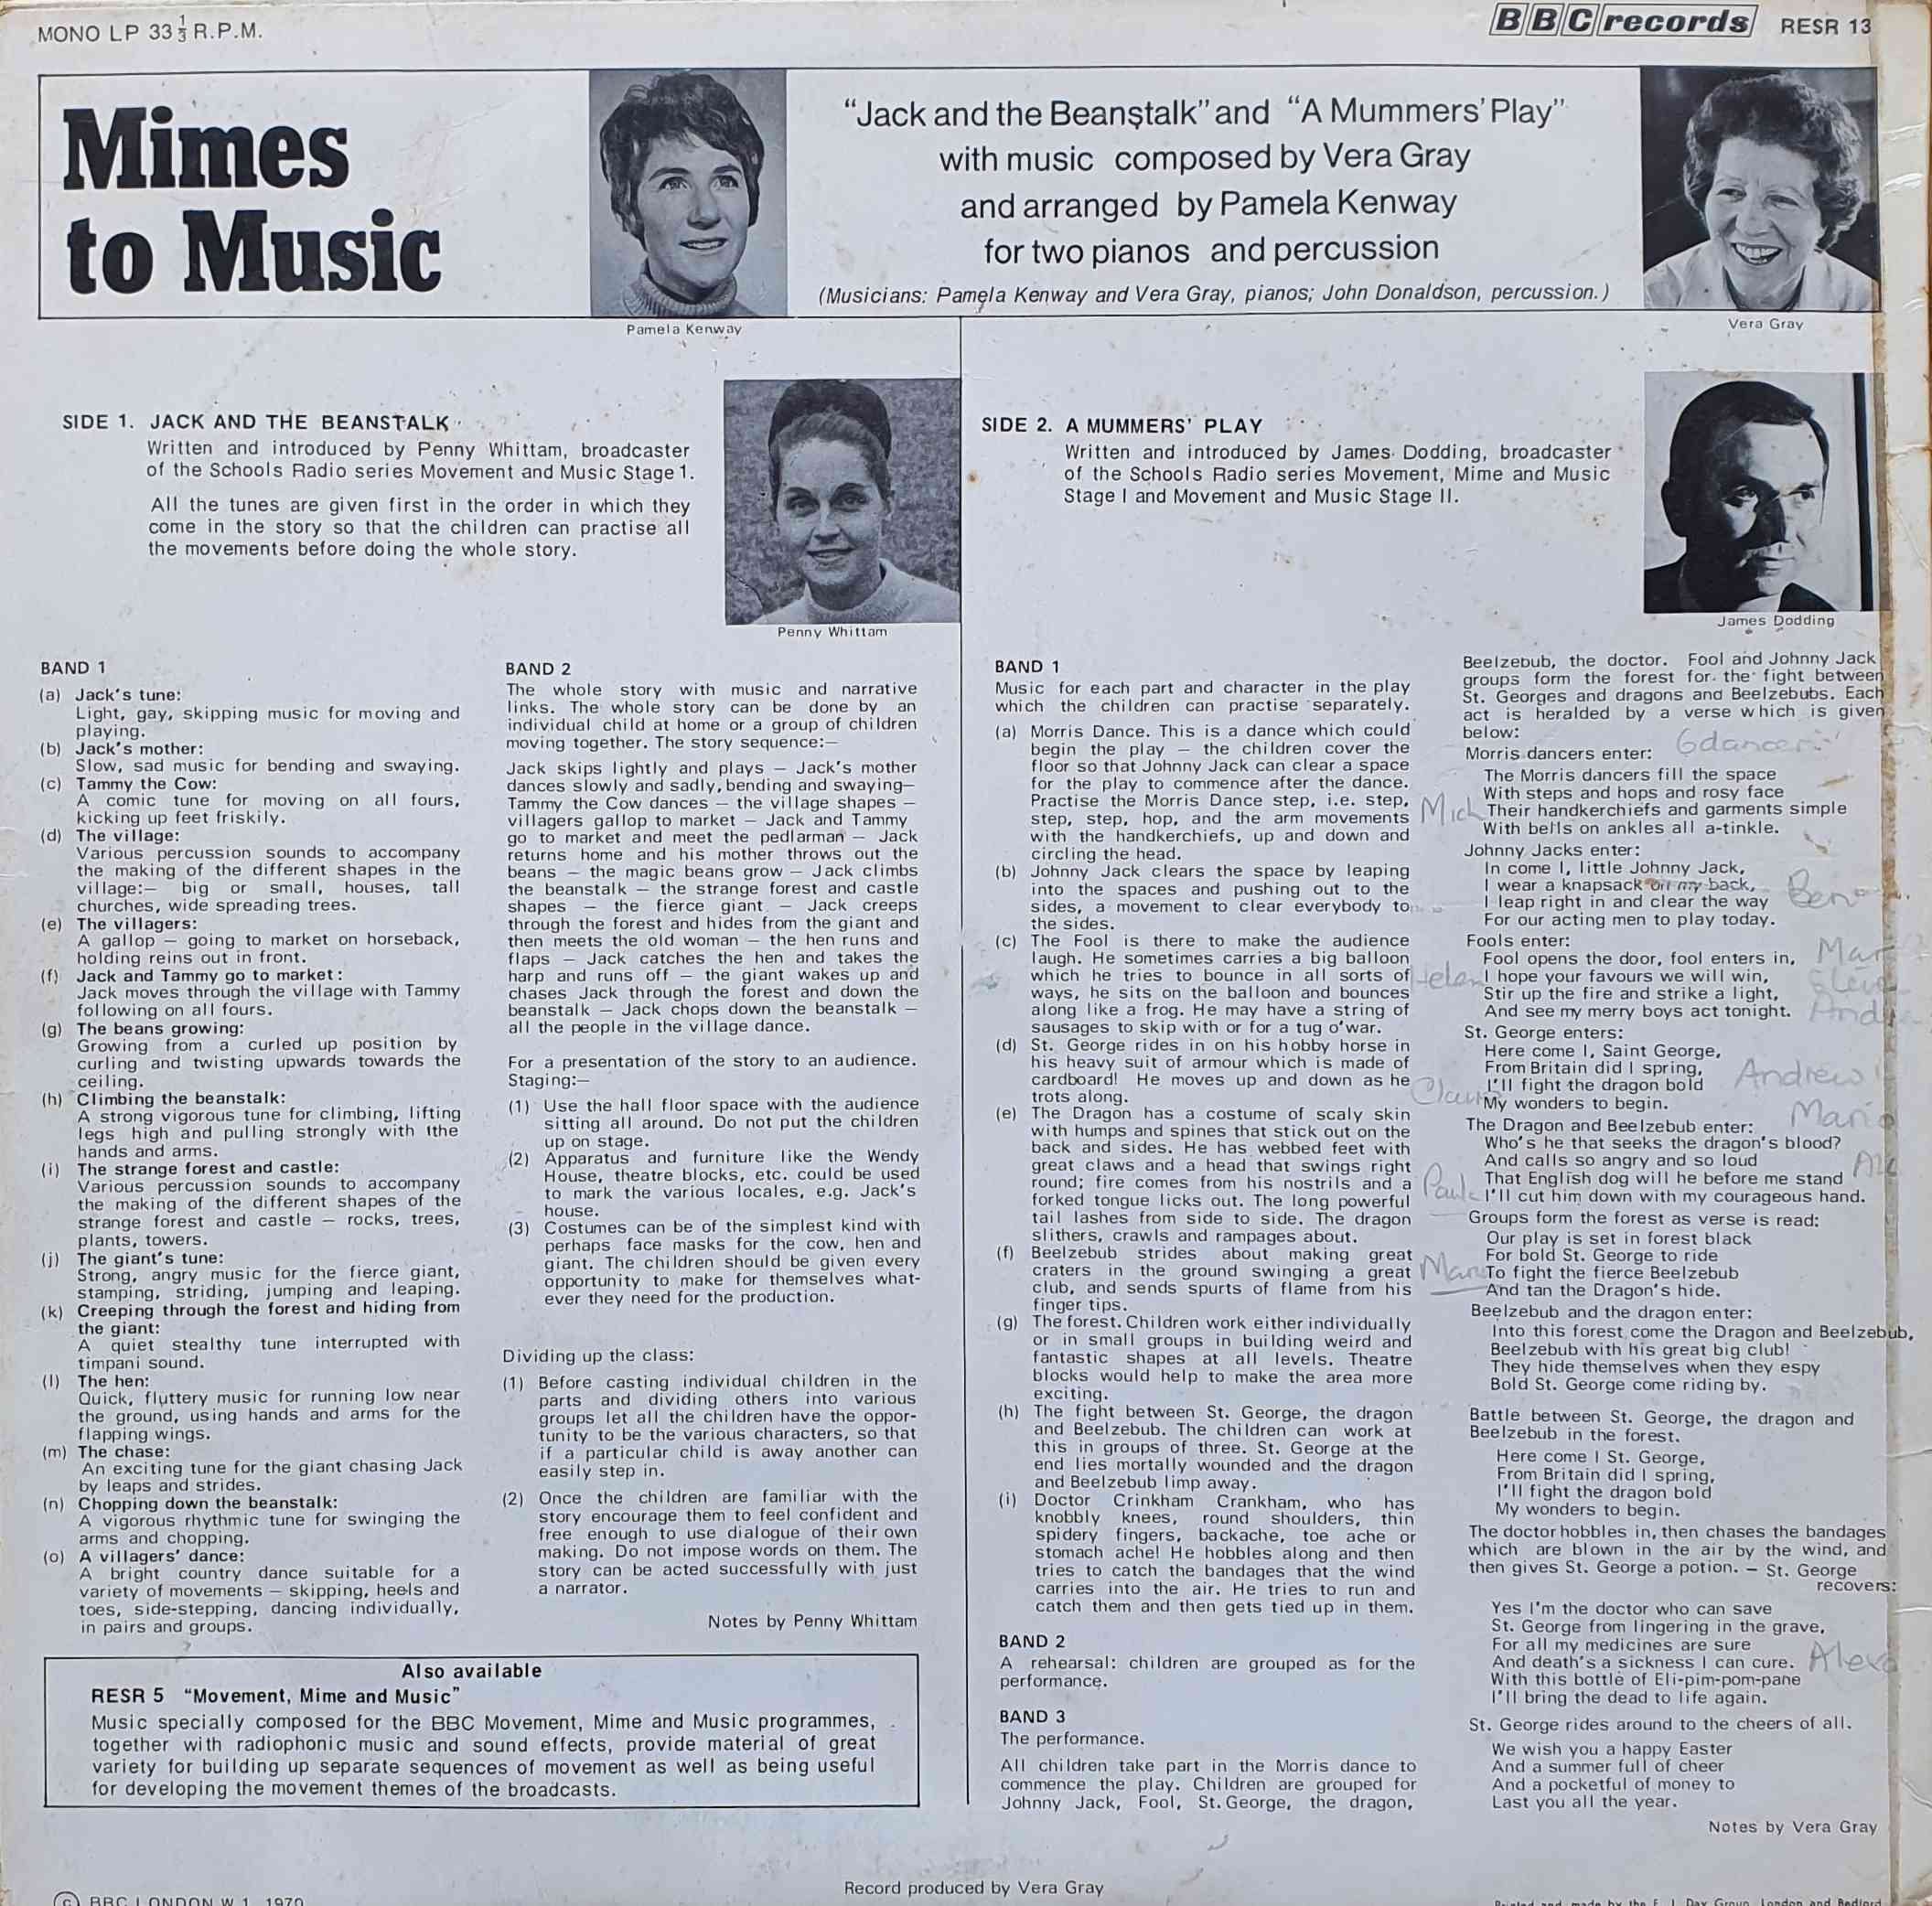 Picture of RESR 13 Movement, mime and music - Volume 2 by artist Vera Grey / Penny Whitham / James Dodding from the BBC records and Tapes library